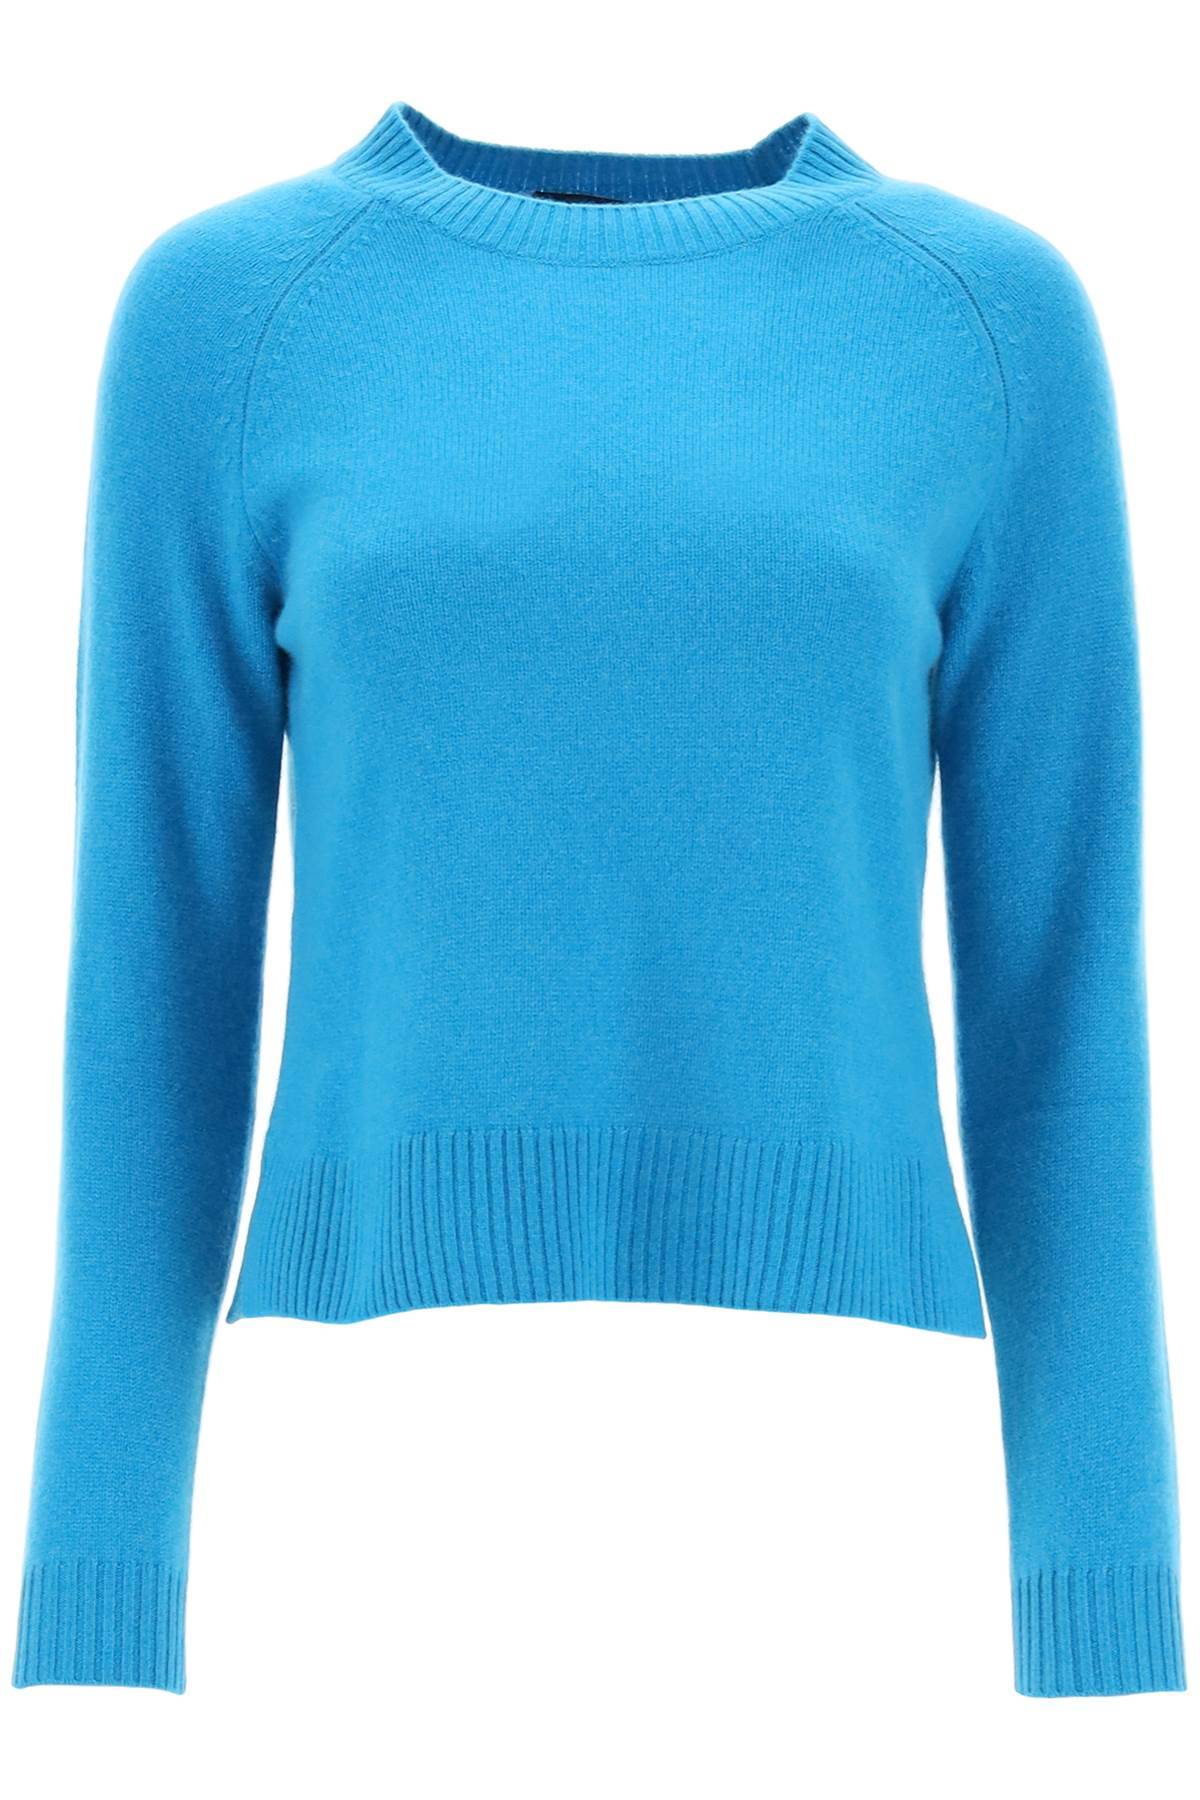 Weekend Max Mara Scatola Cashmere Jumper In Light Blue